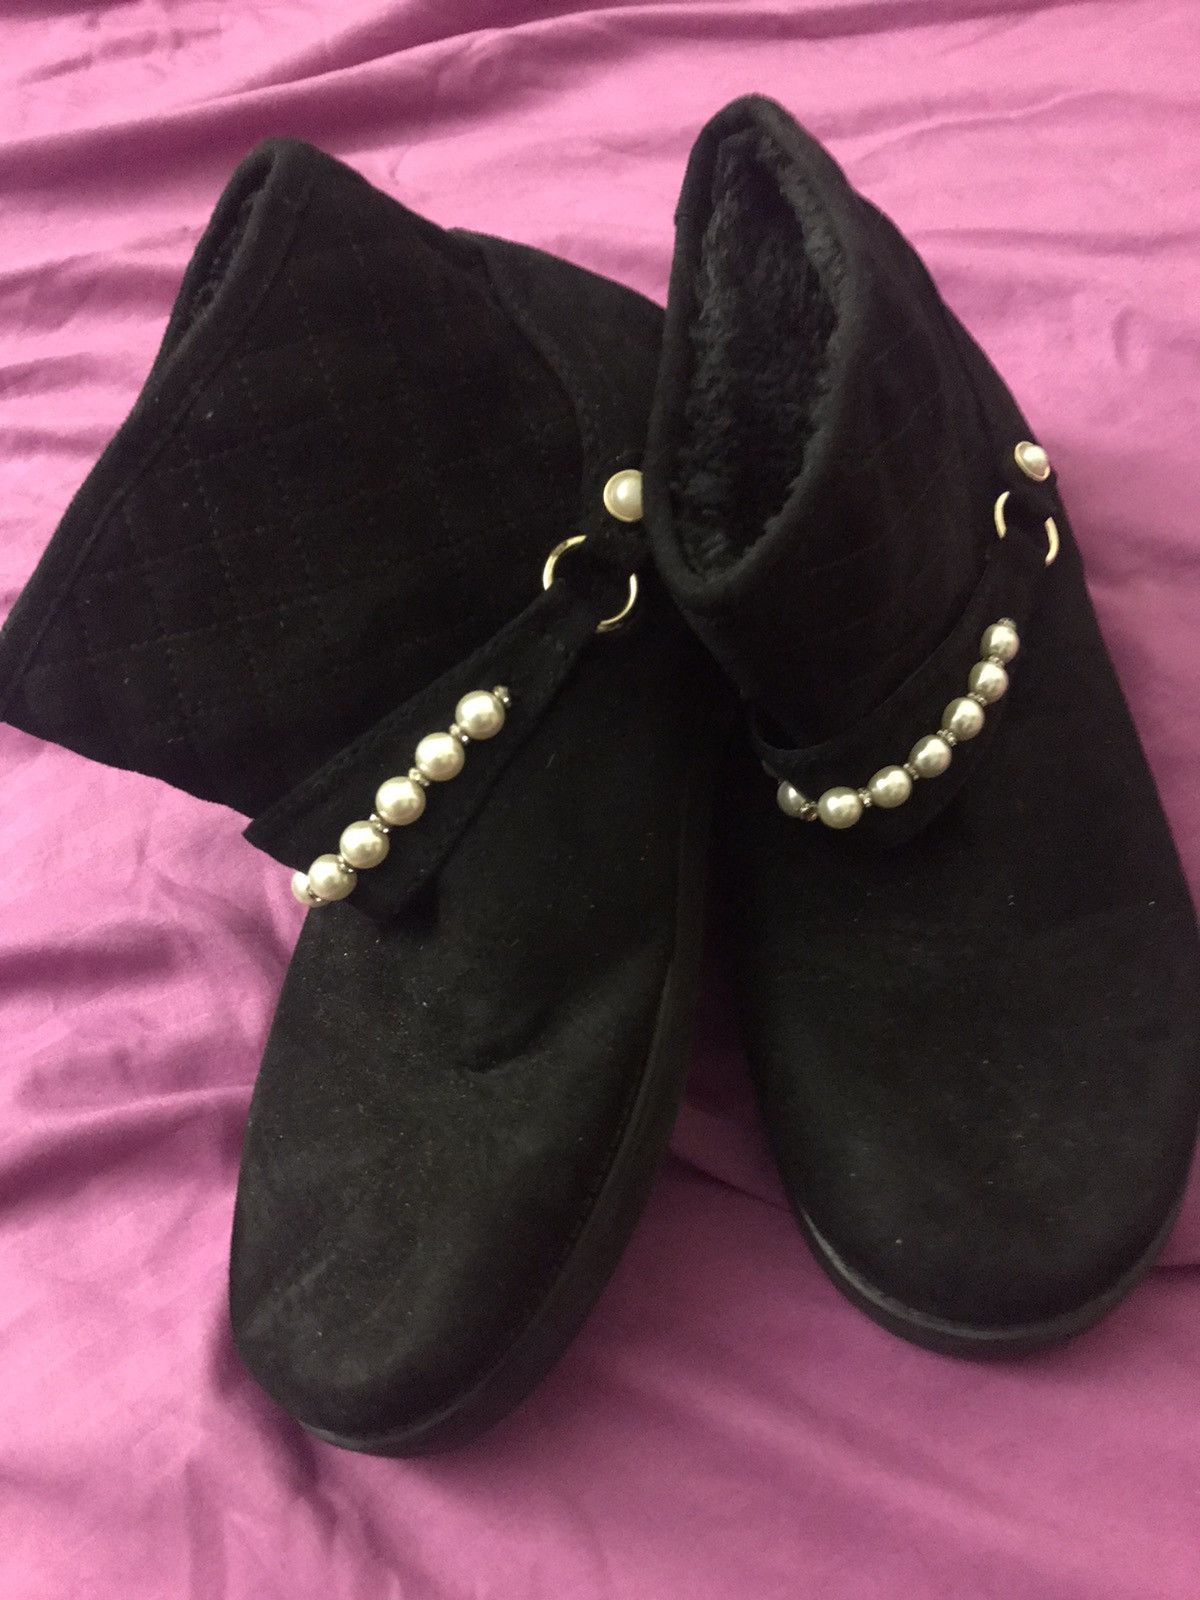 The Unbranded Brand Women’s Winter Boots With Fur & Beads Size US 10 / IT 40 - 3 Thumbnail